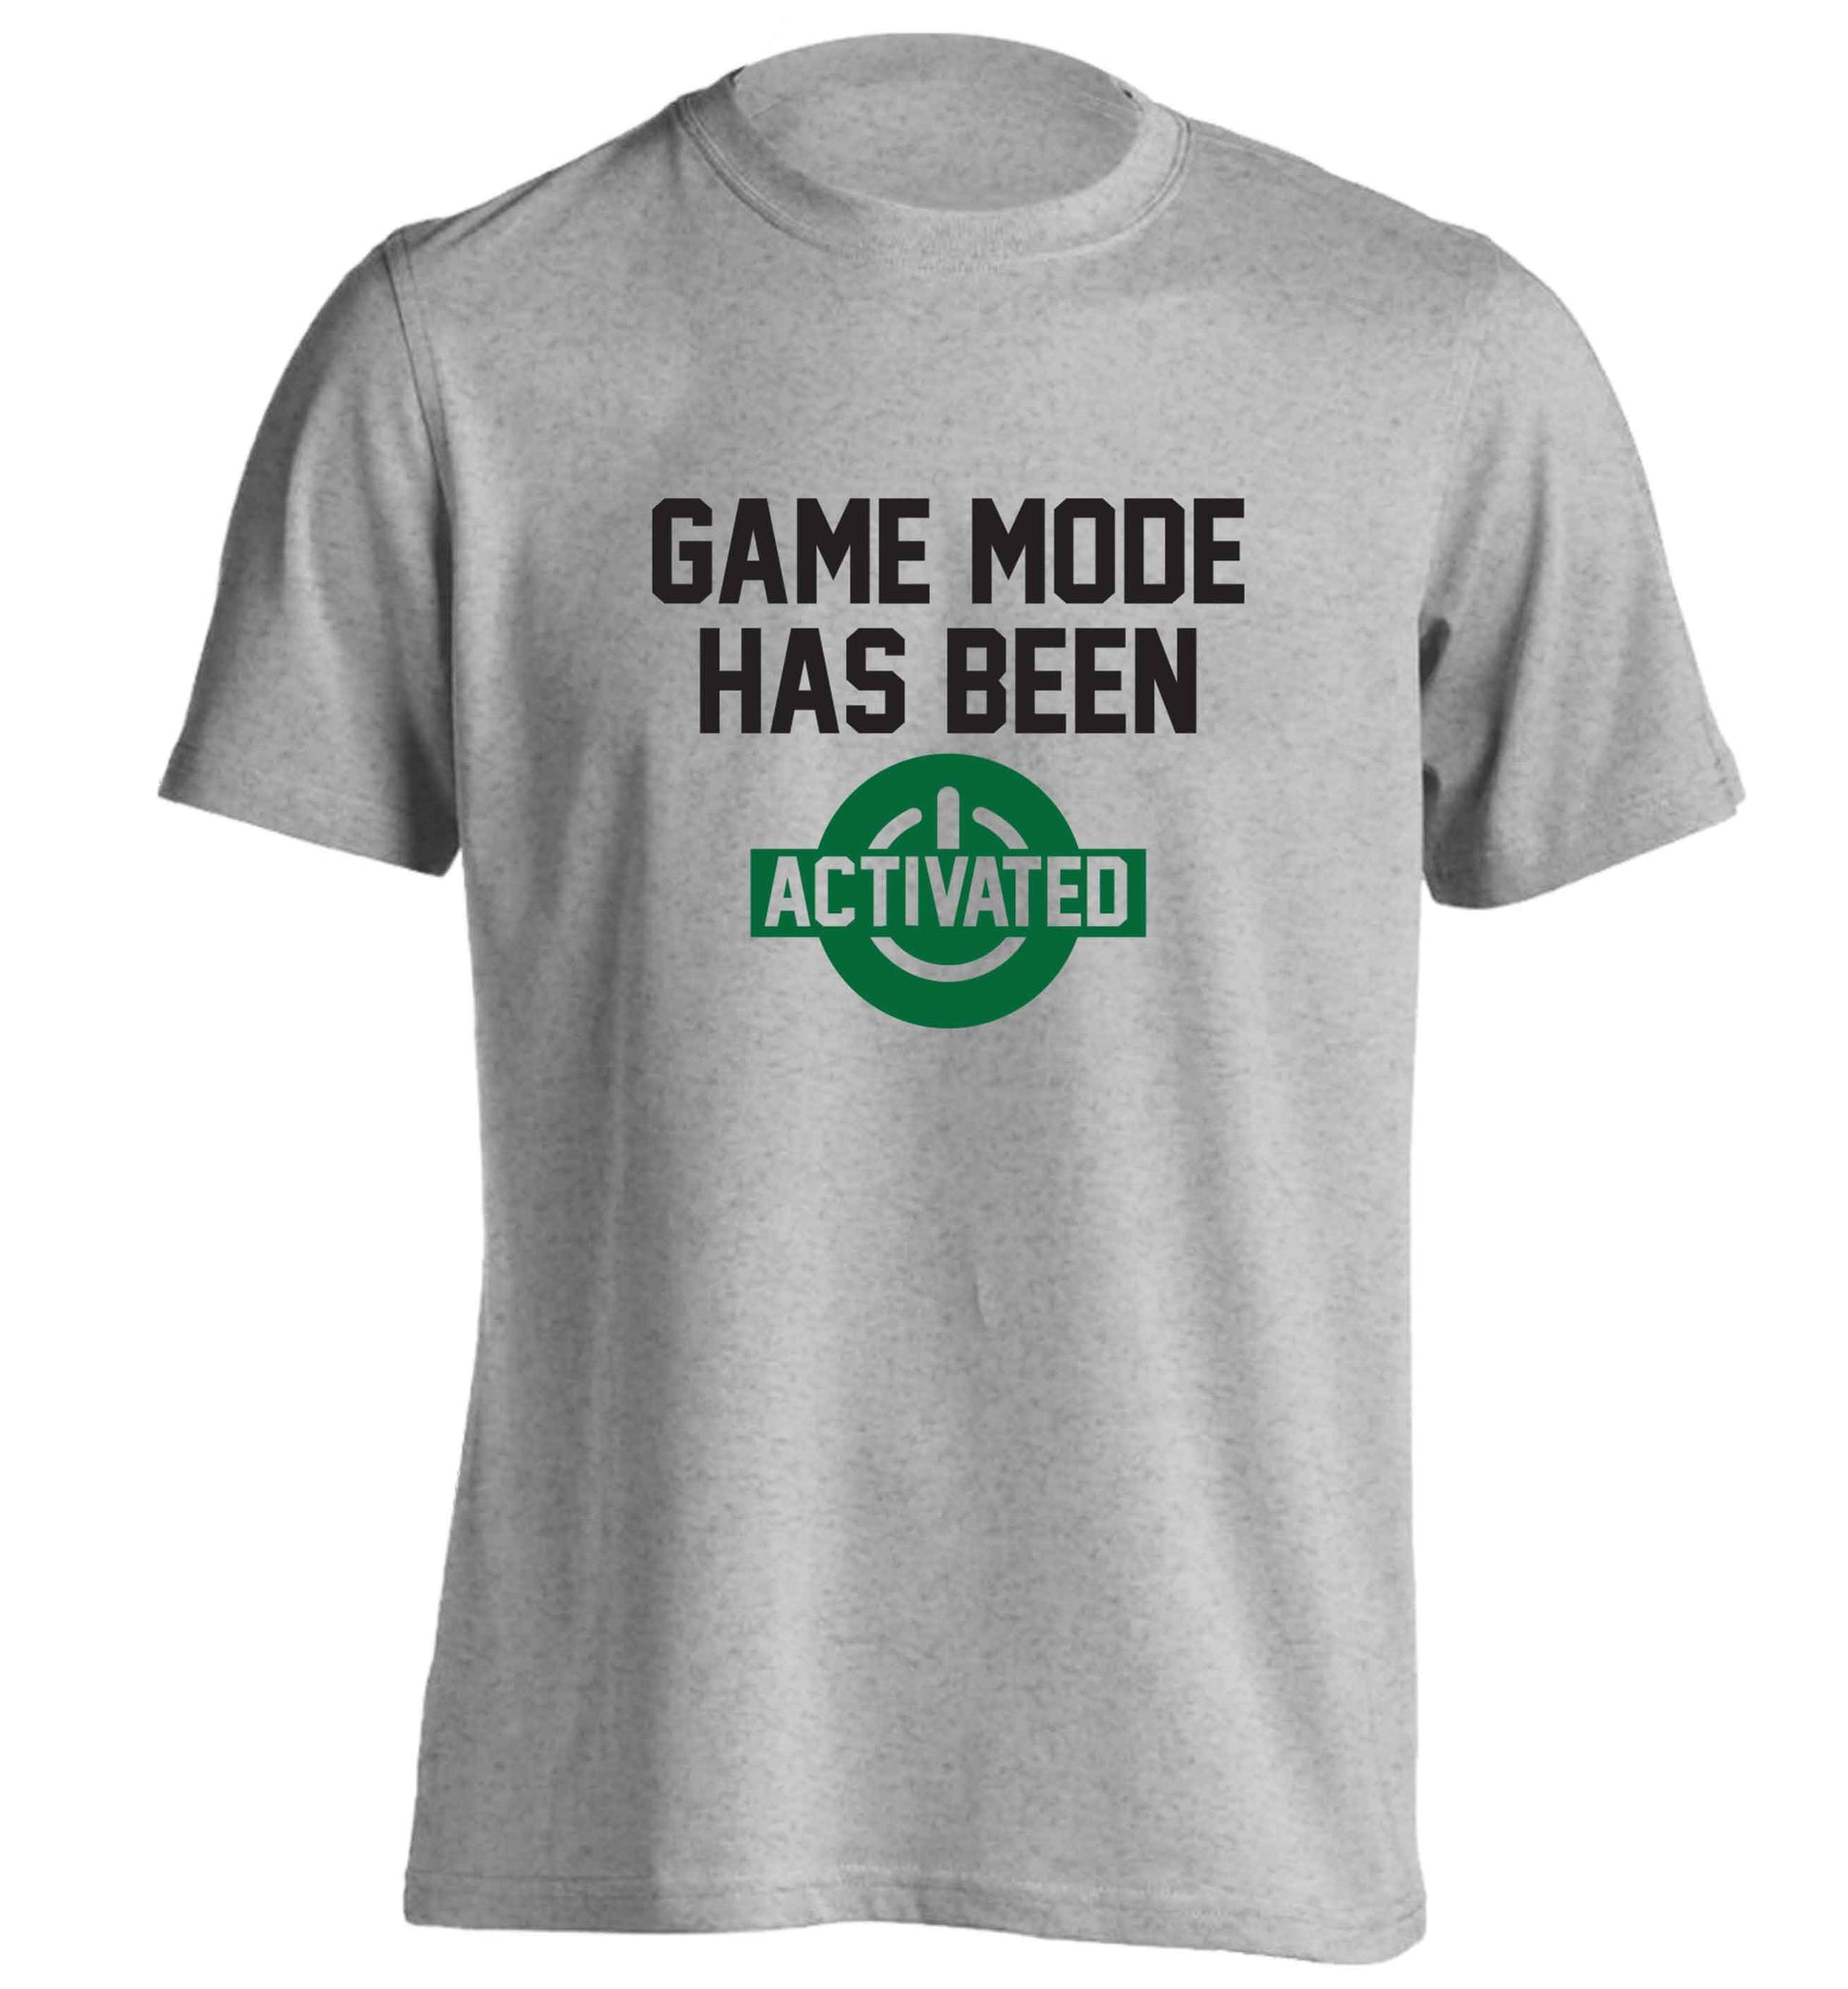 Game mode has been activated adults unisex grey Tshirt 2XL